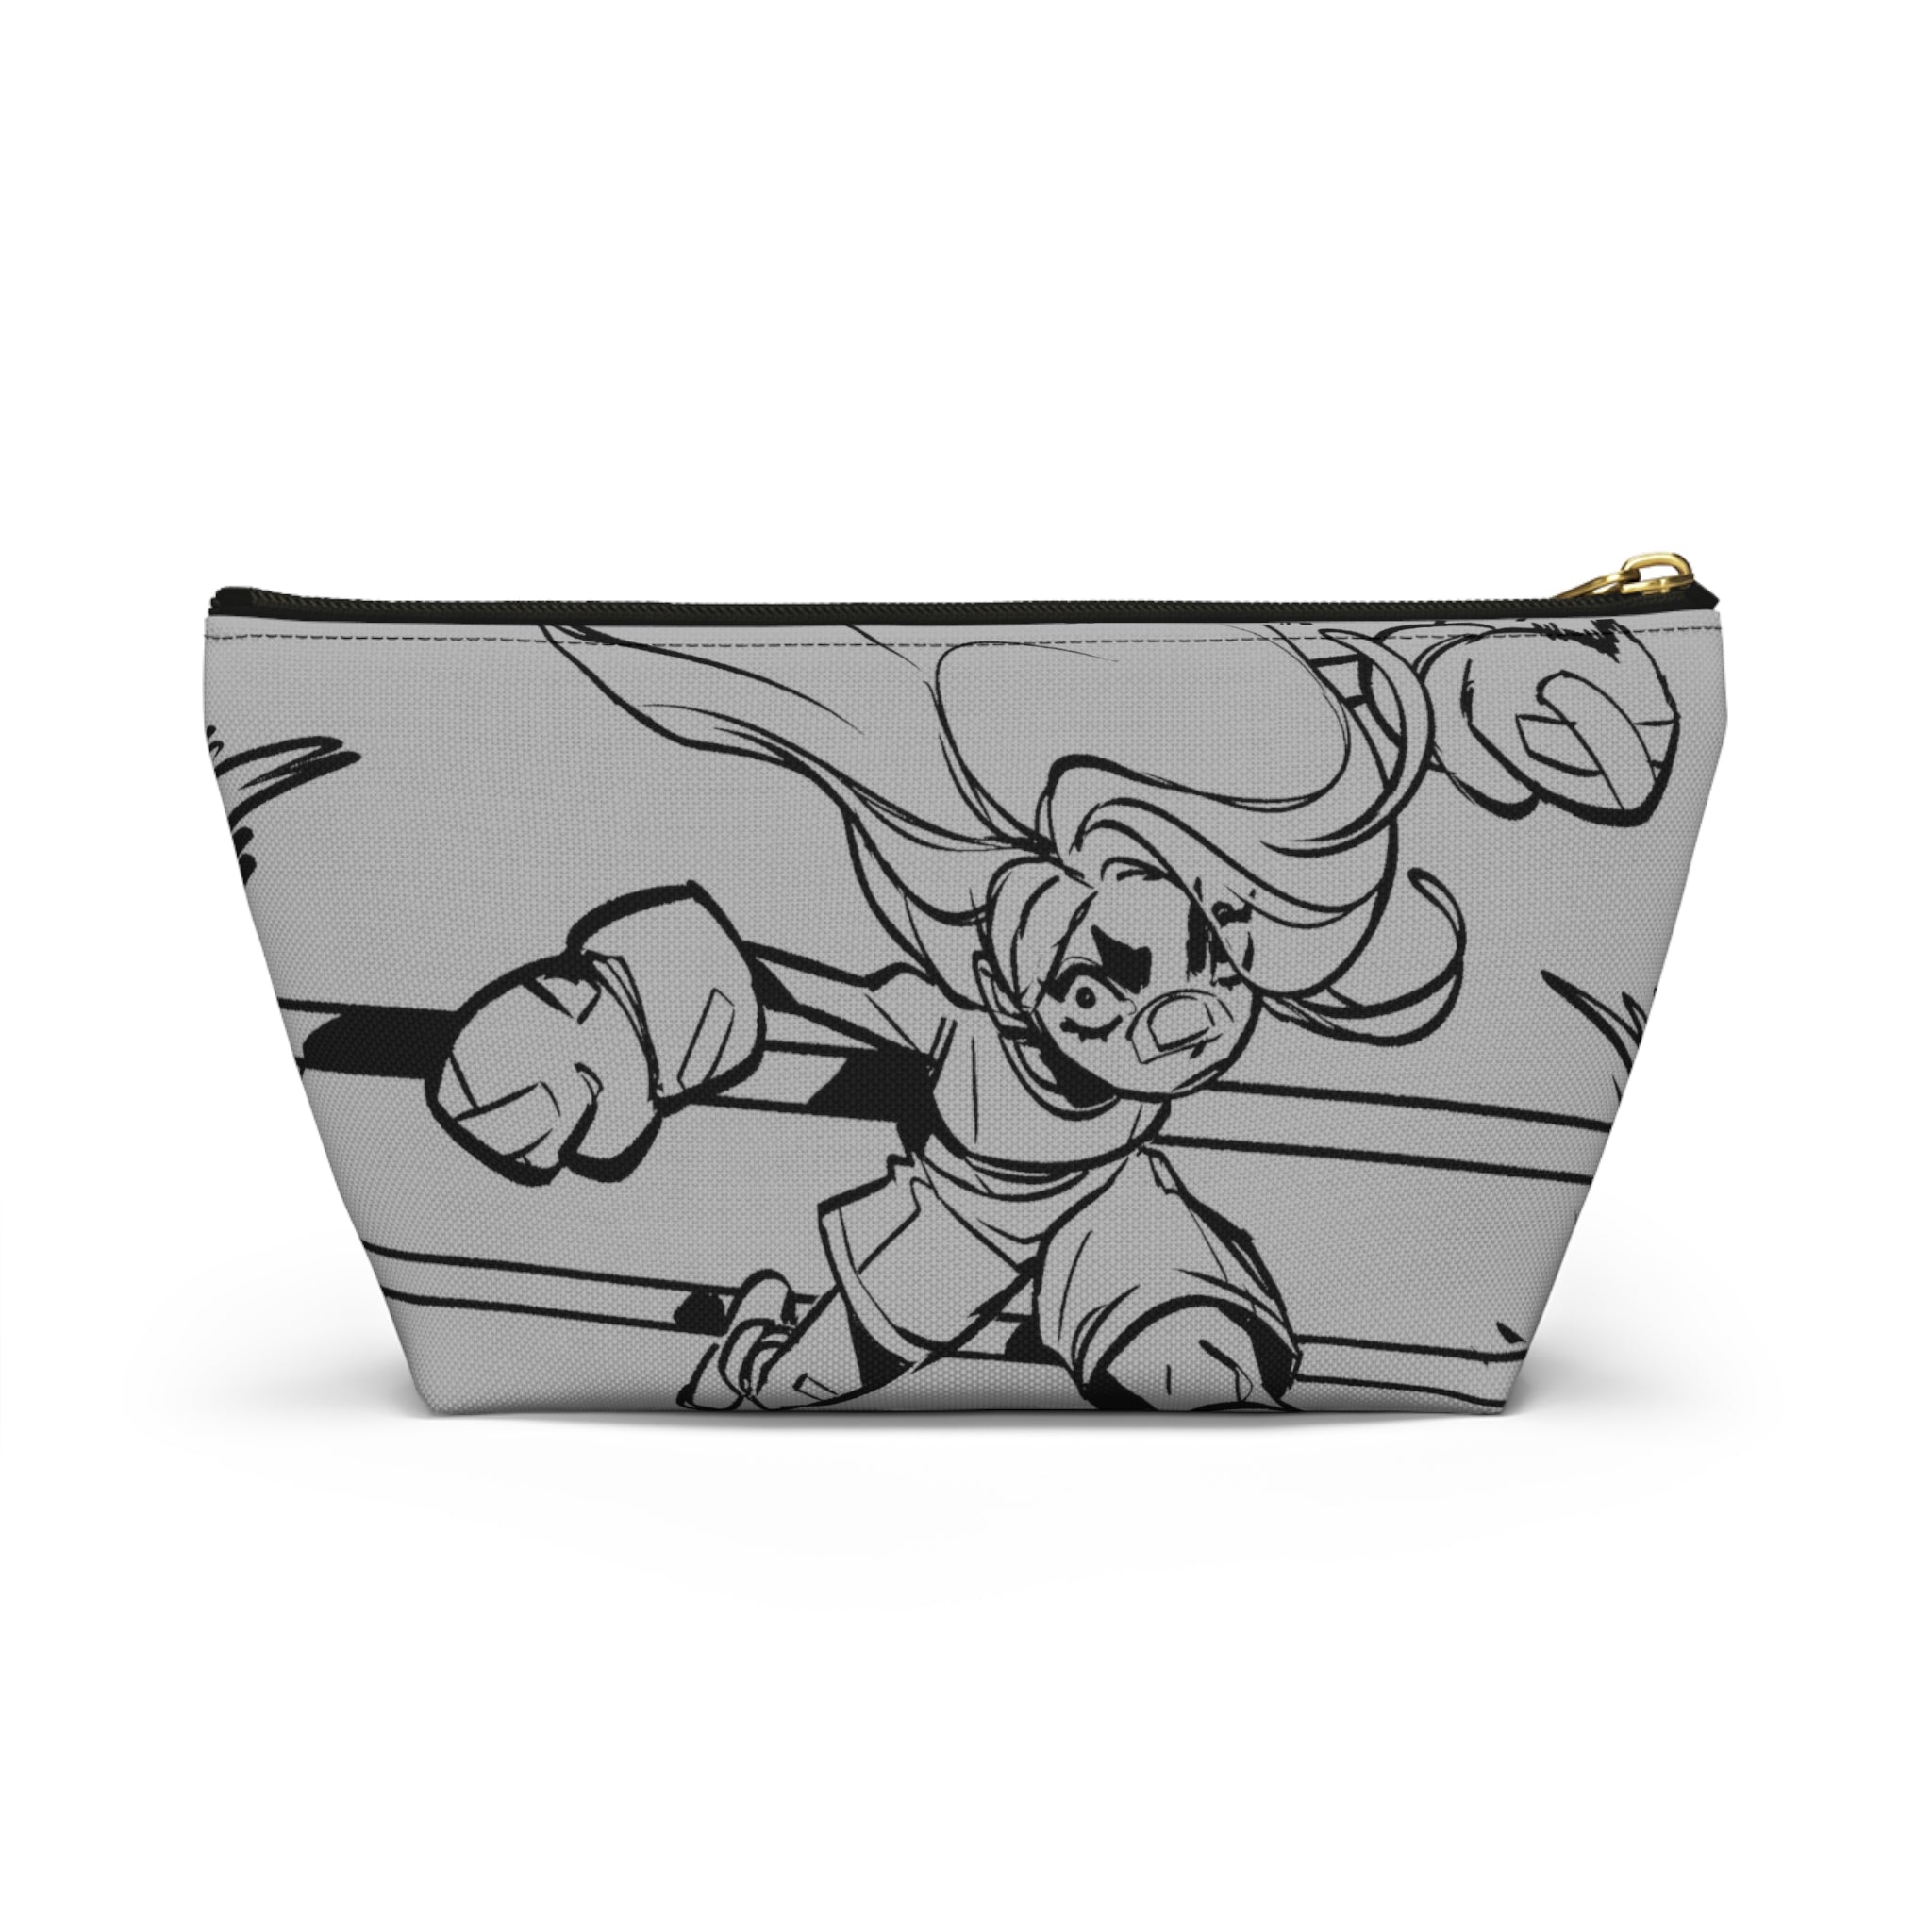 Super Punchy Girl Pouch (Grey)